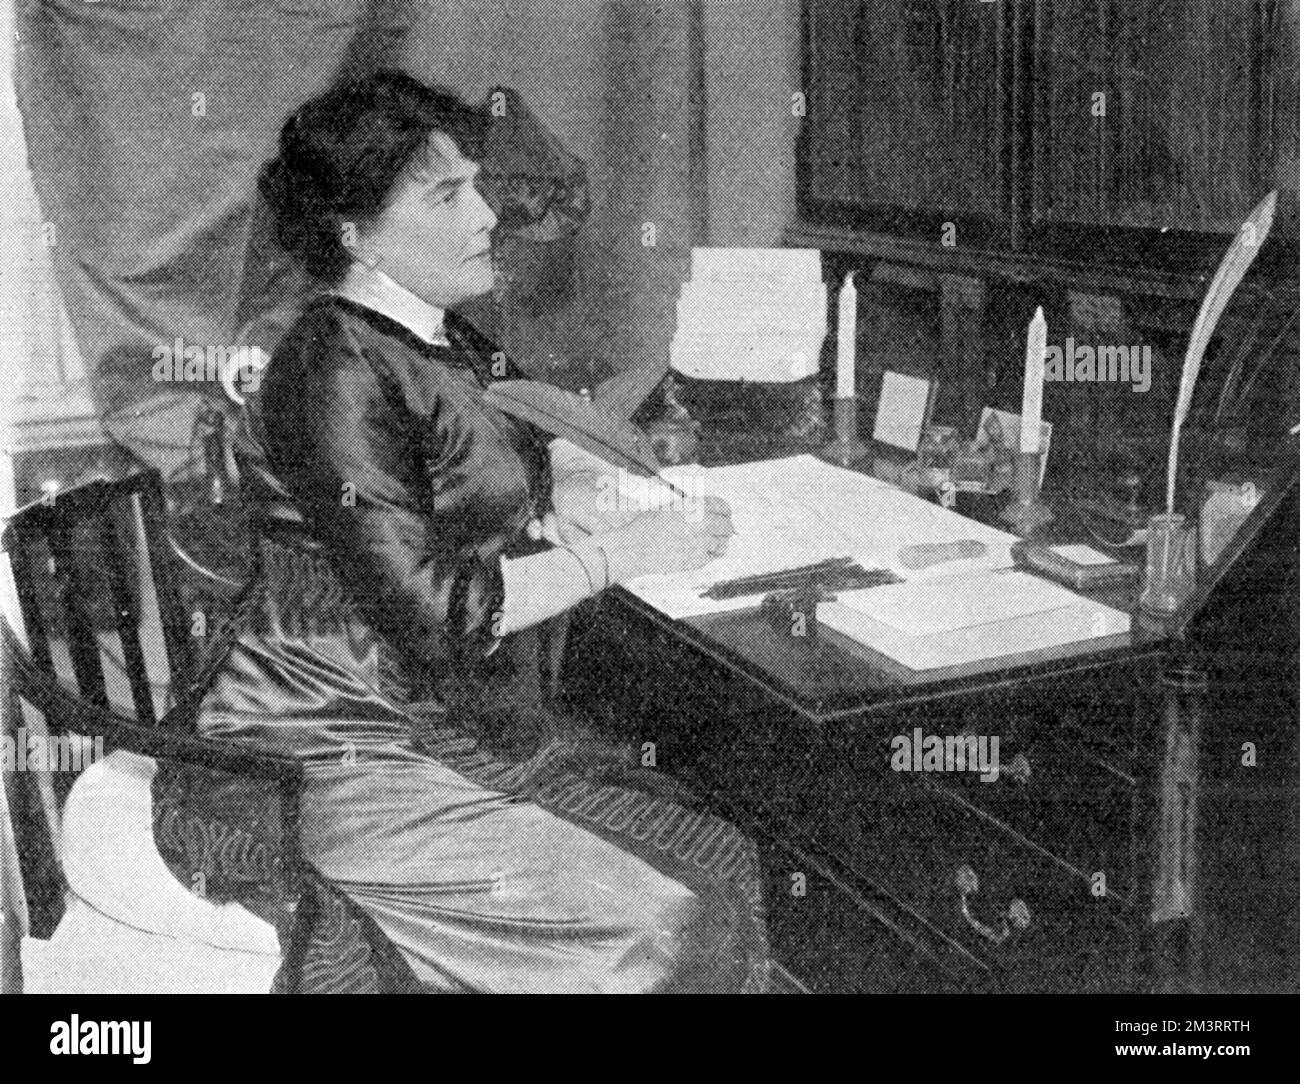 Mrs George Cornwallis-West, formerly Miss Jennie Jerome and Lady Randolph Churchill, mother of Winston Churchill, pictured at work as the promoter and organiser of 'Shakespeare's England' an exhibition-pageant at Earl's Court exhibition in the summer of 1912.       Date: 1912 Stock Photo